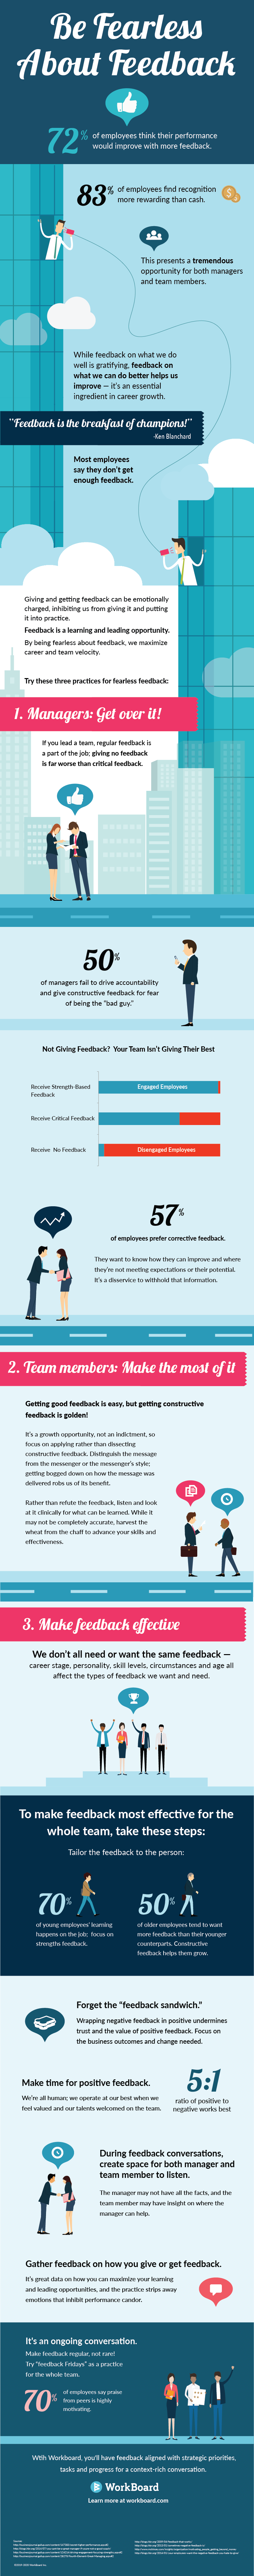 Infographic: Be Fearless About Feedback